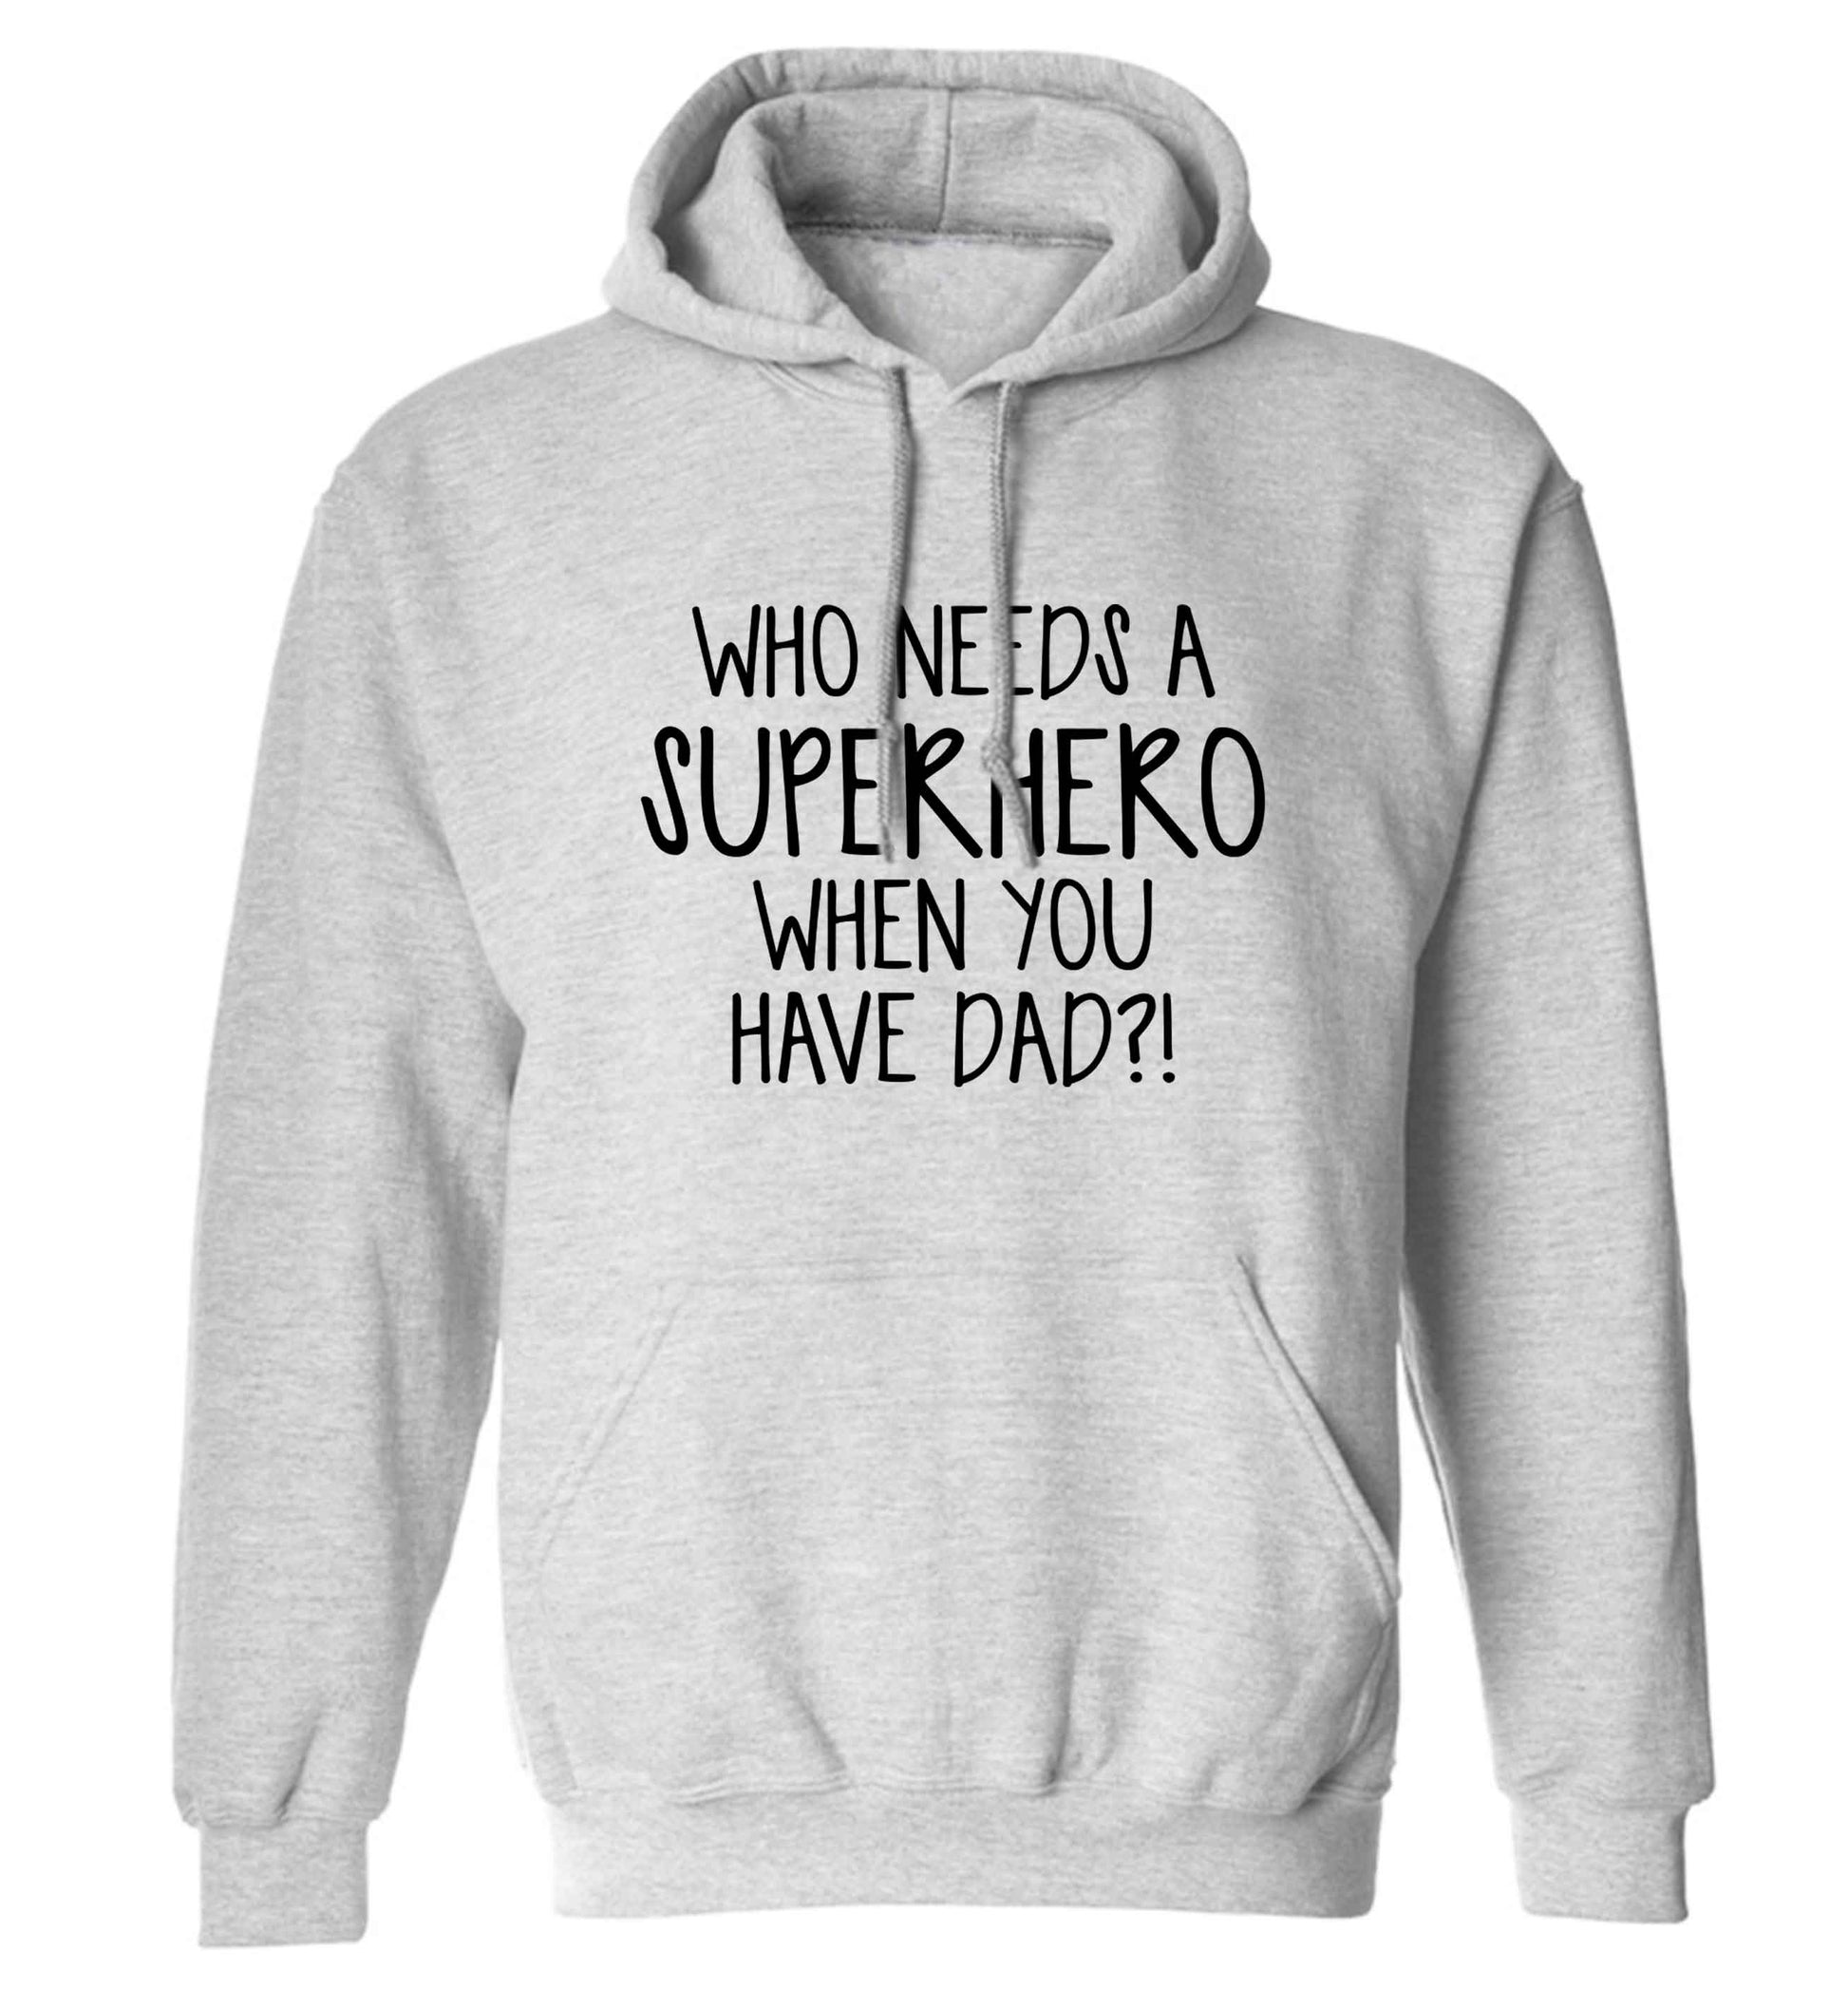 Who needs a superhero when you have dad! adults unisex grey hoodie 2XL